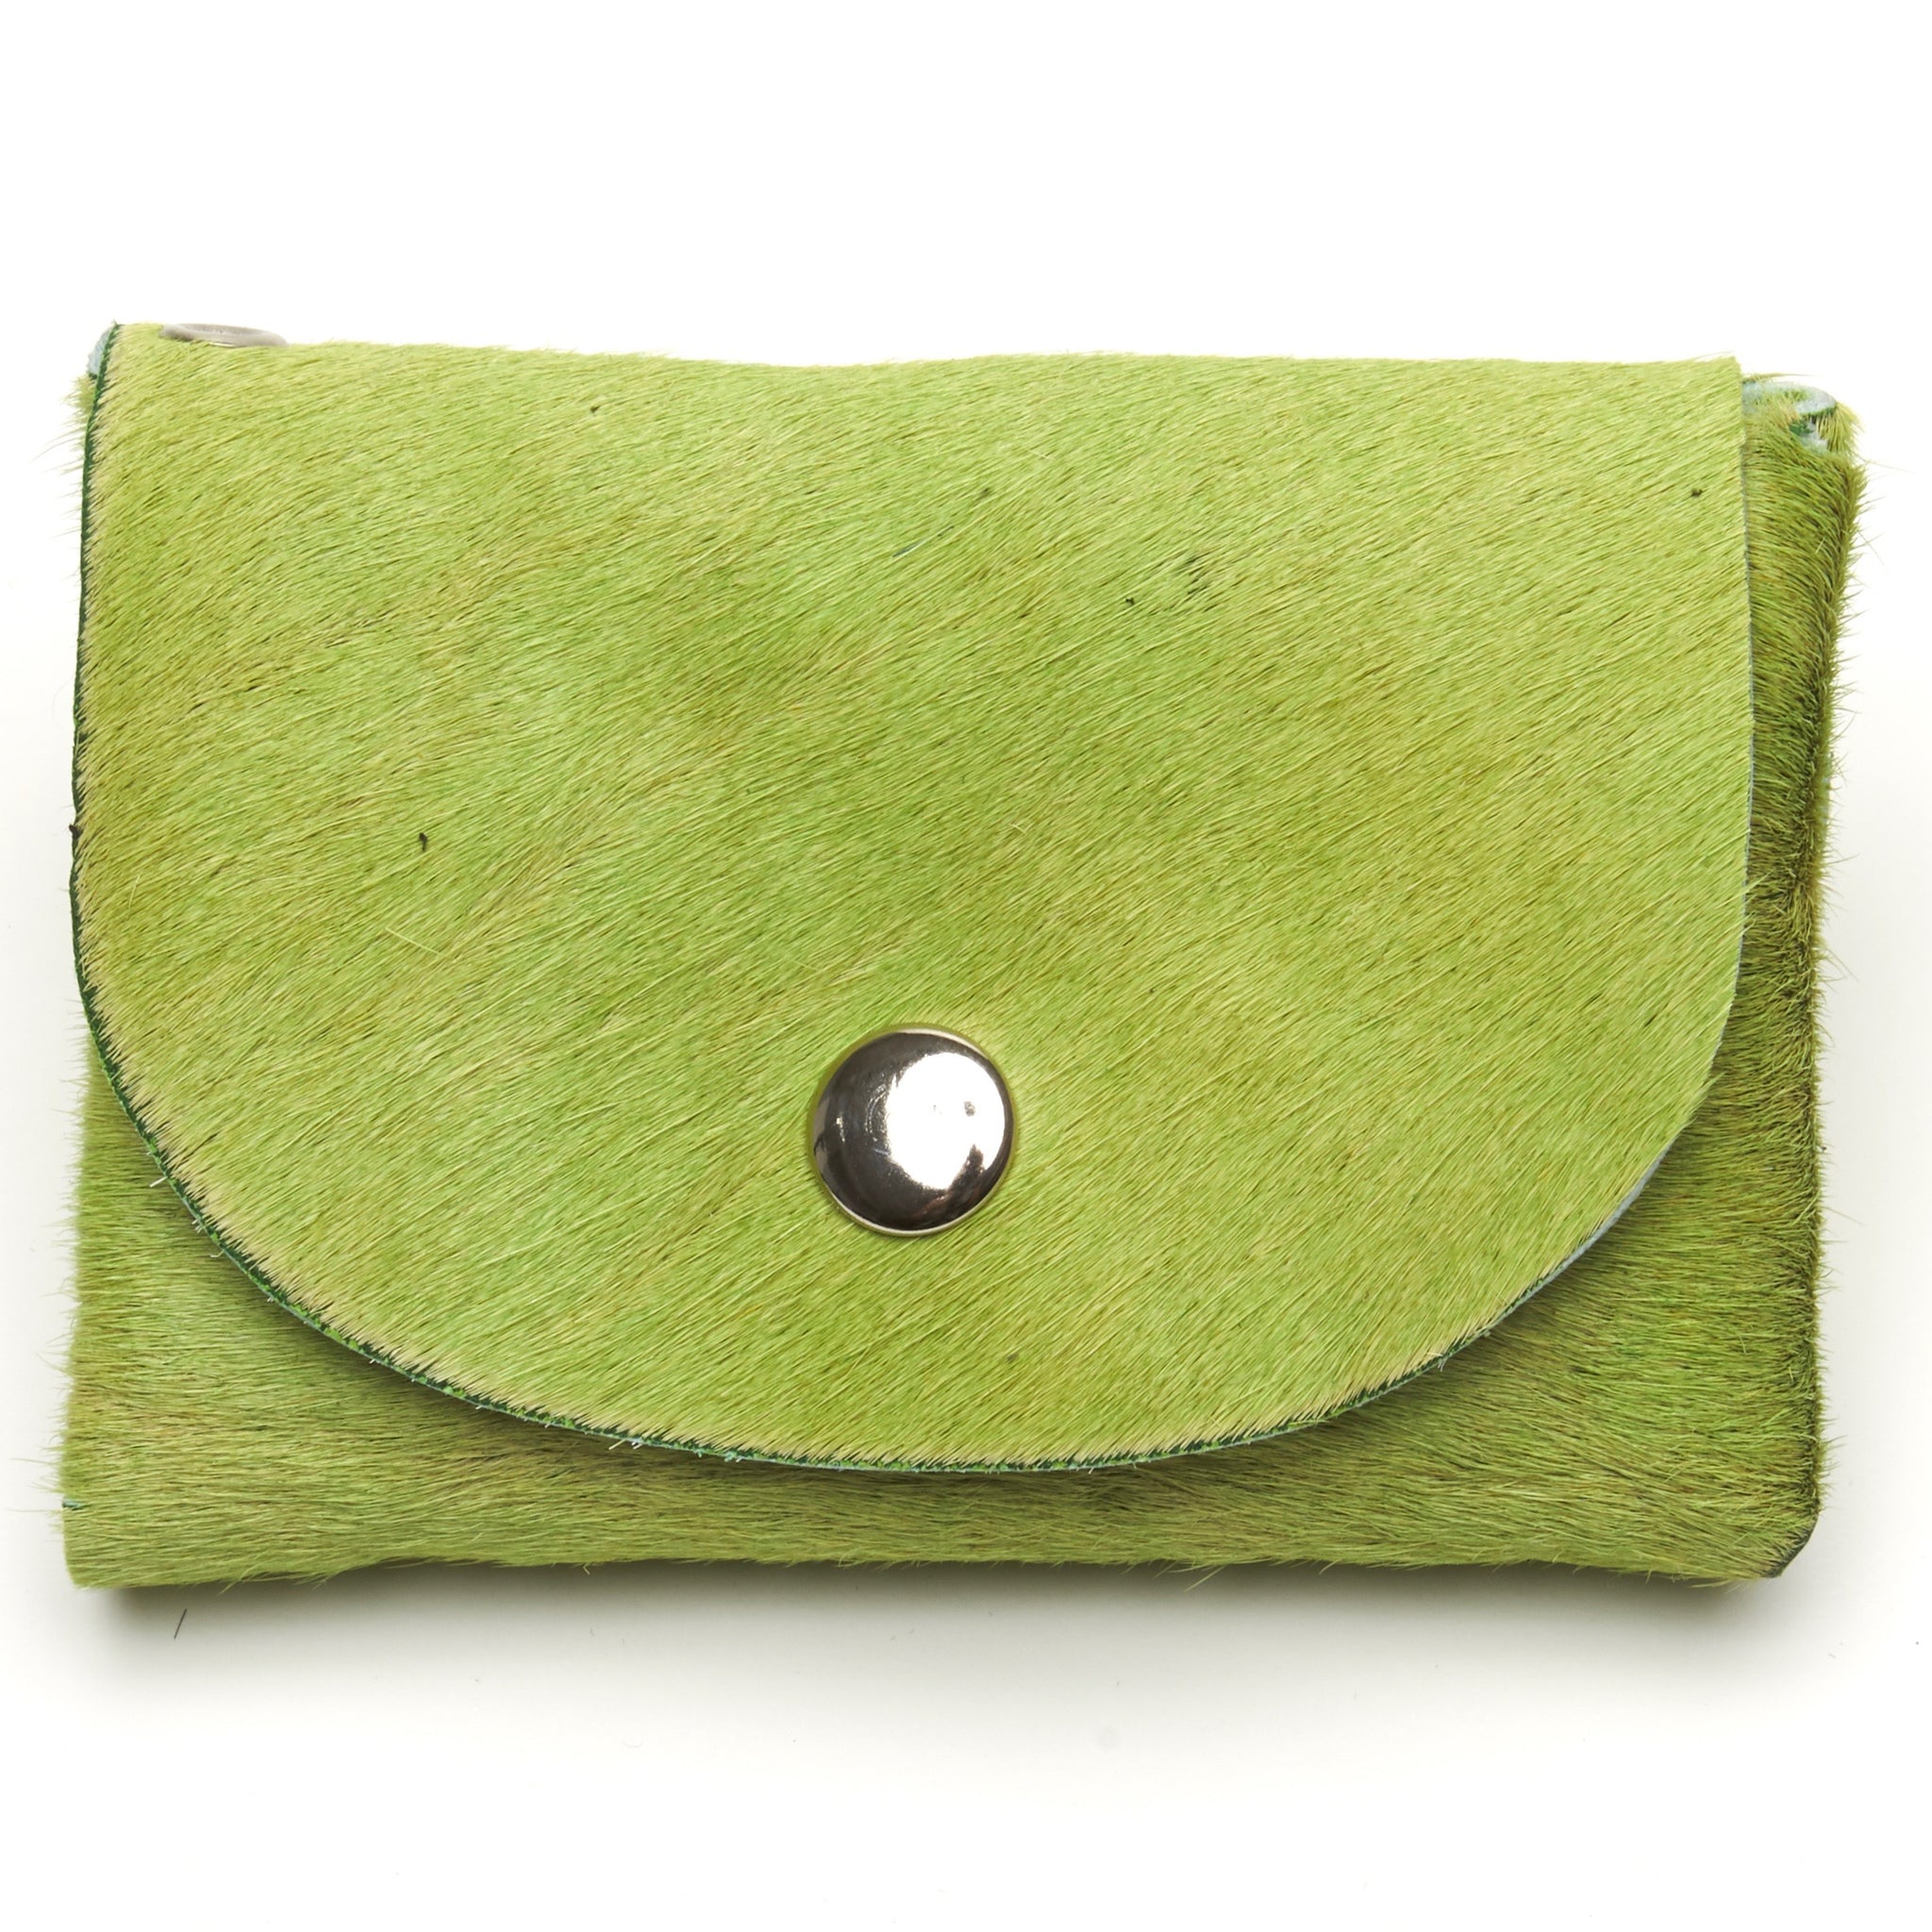 The Essentials wallet green hair-on cowhide with heart-shaped Celtic knot concho. By NYET Jewelry.